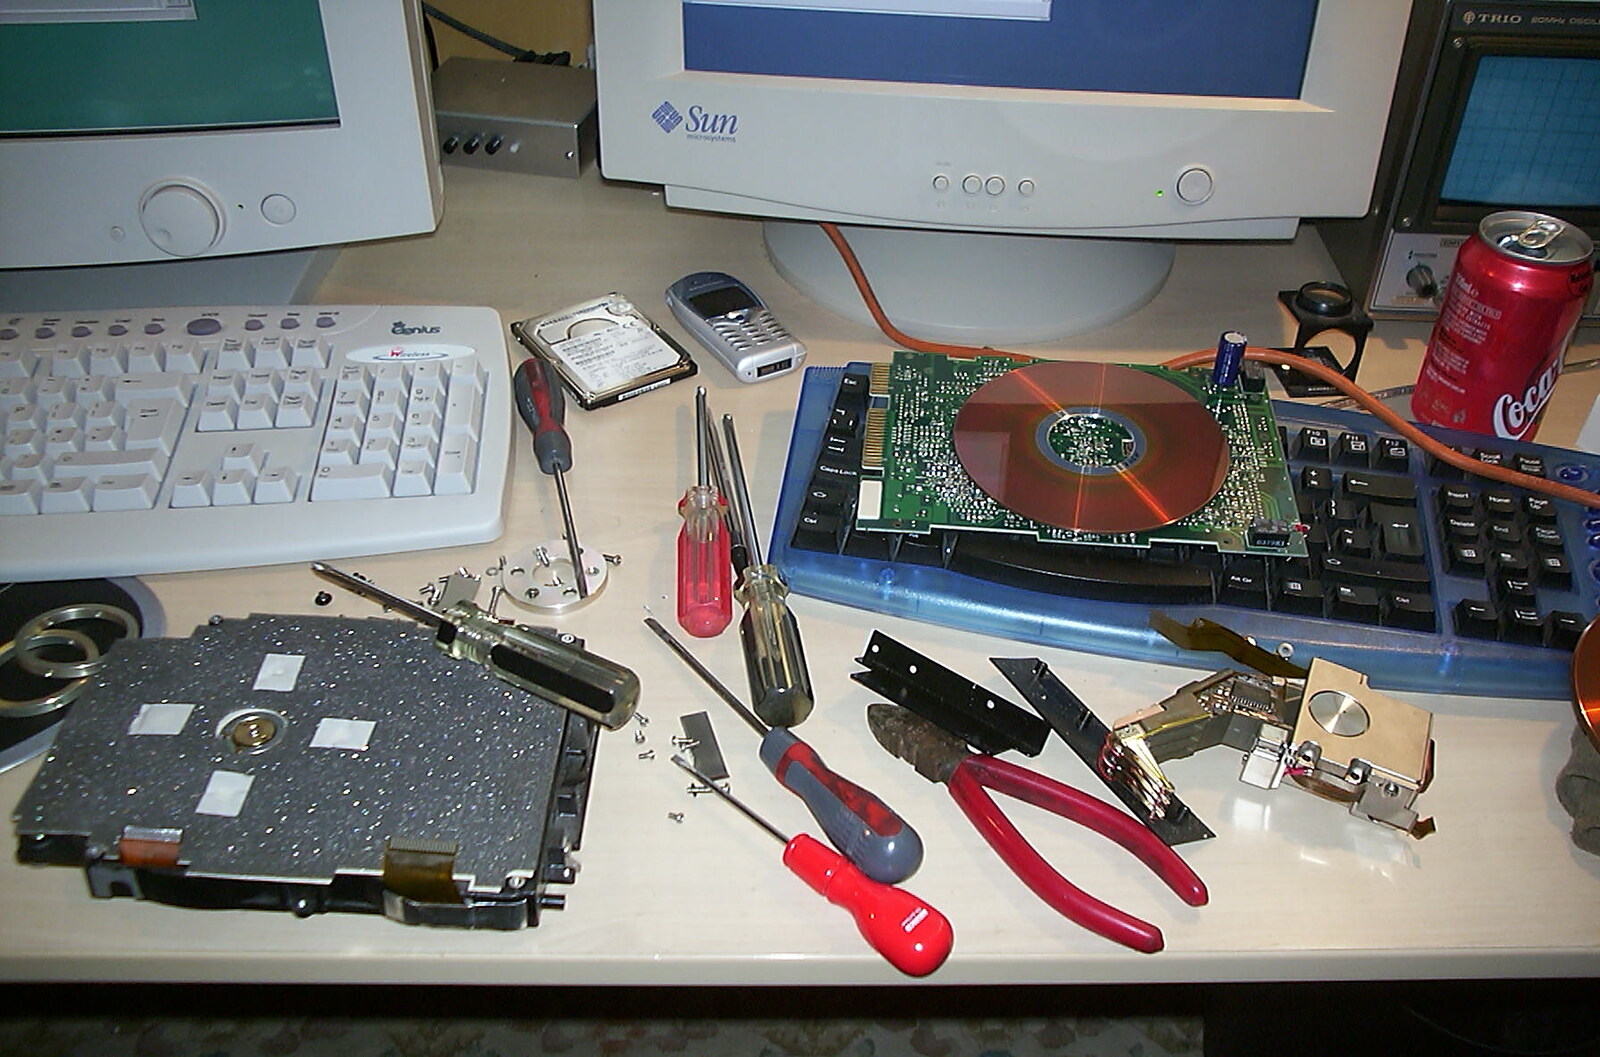 Tools on the desk from A Hard-Drive Clock and Other Projects, Brome, Suffolk - 28th June 2002